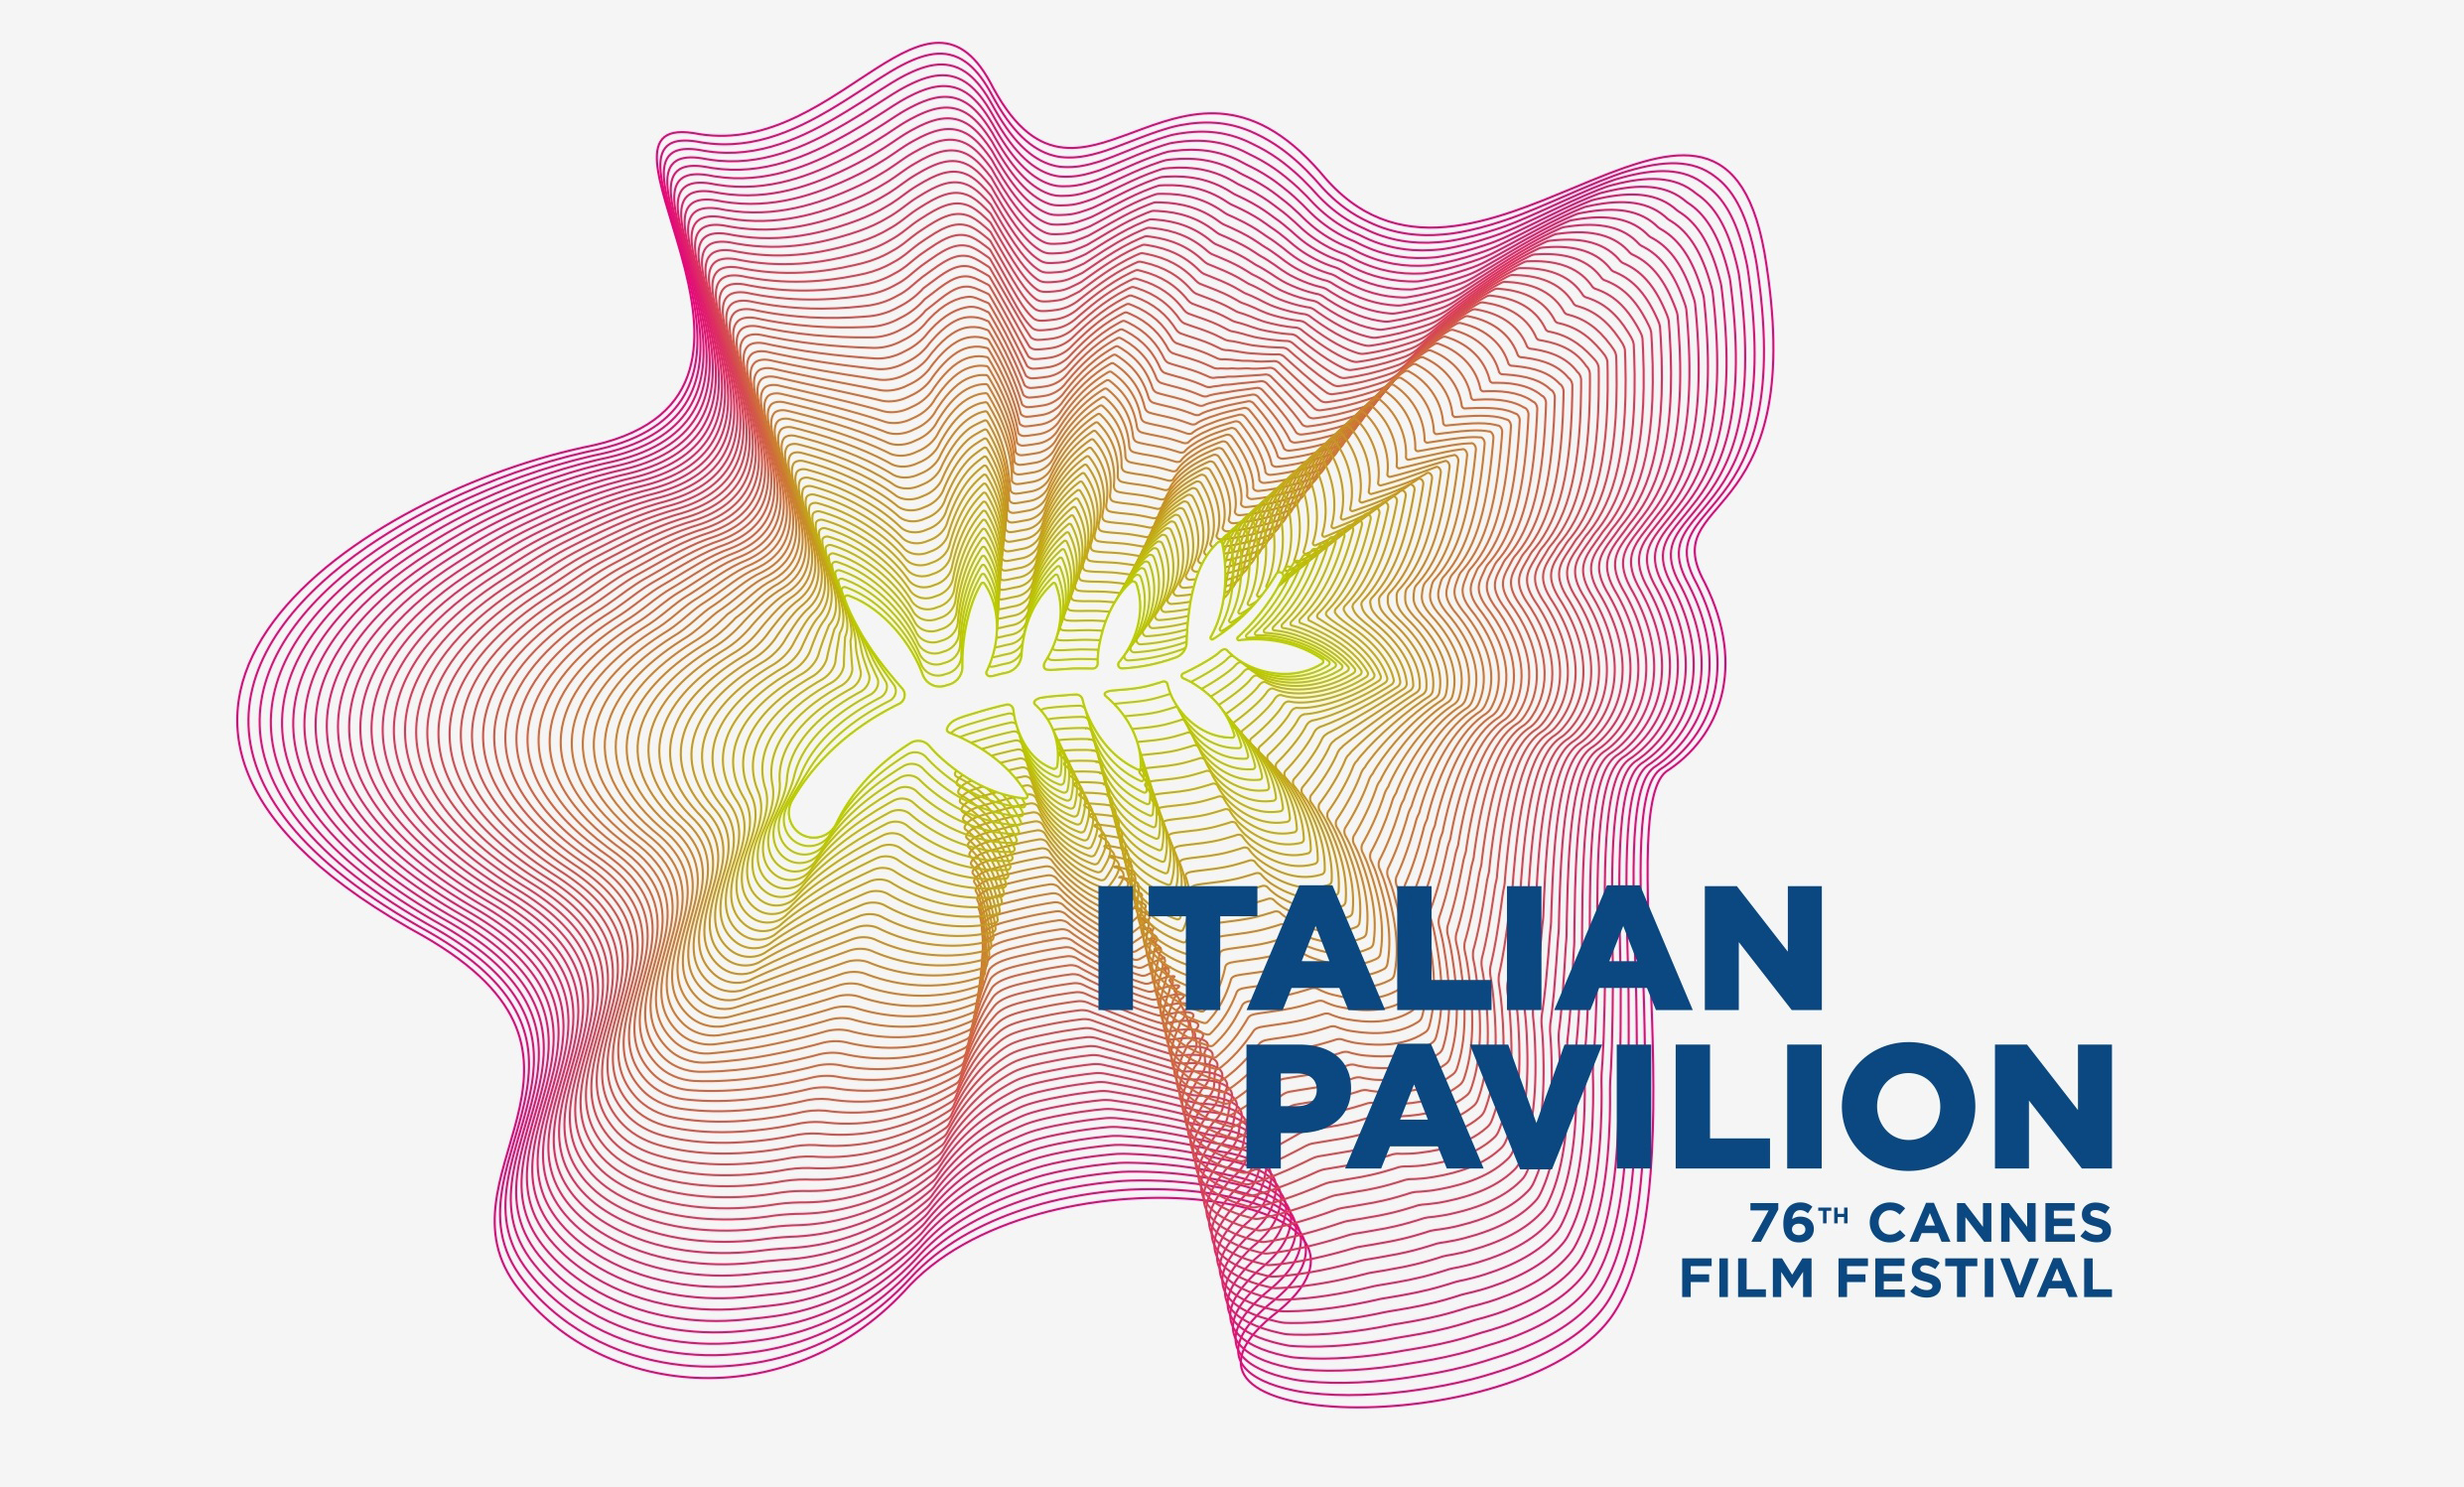 Italian Pavilion is back at the 76. Cannes Film Festival